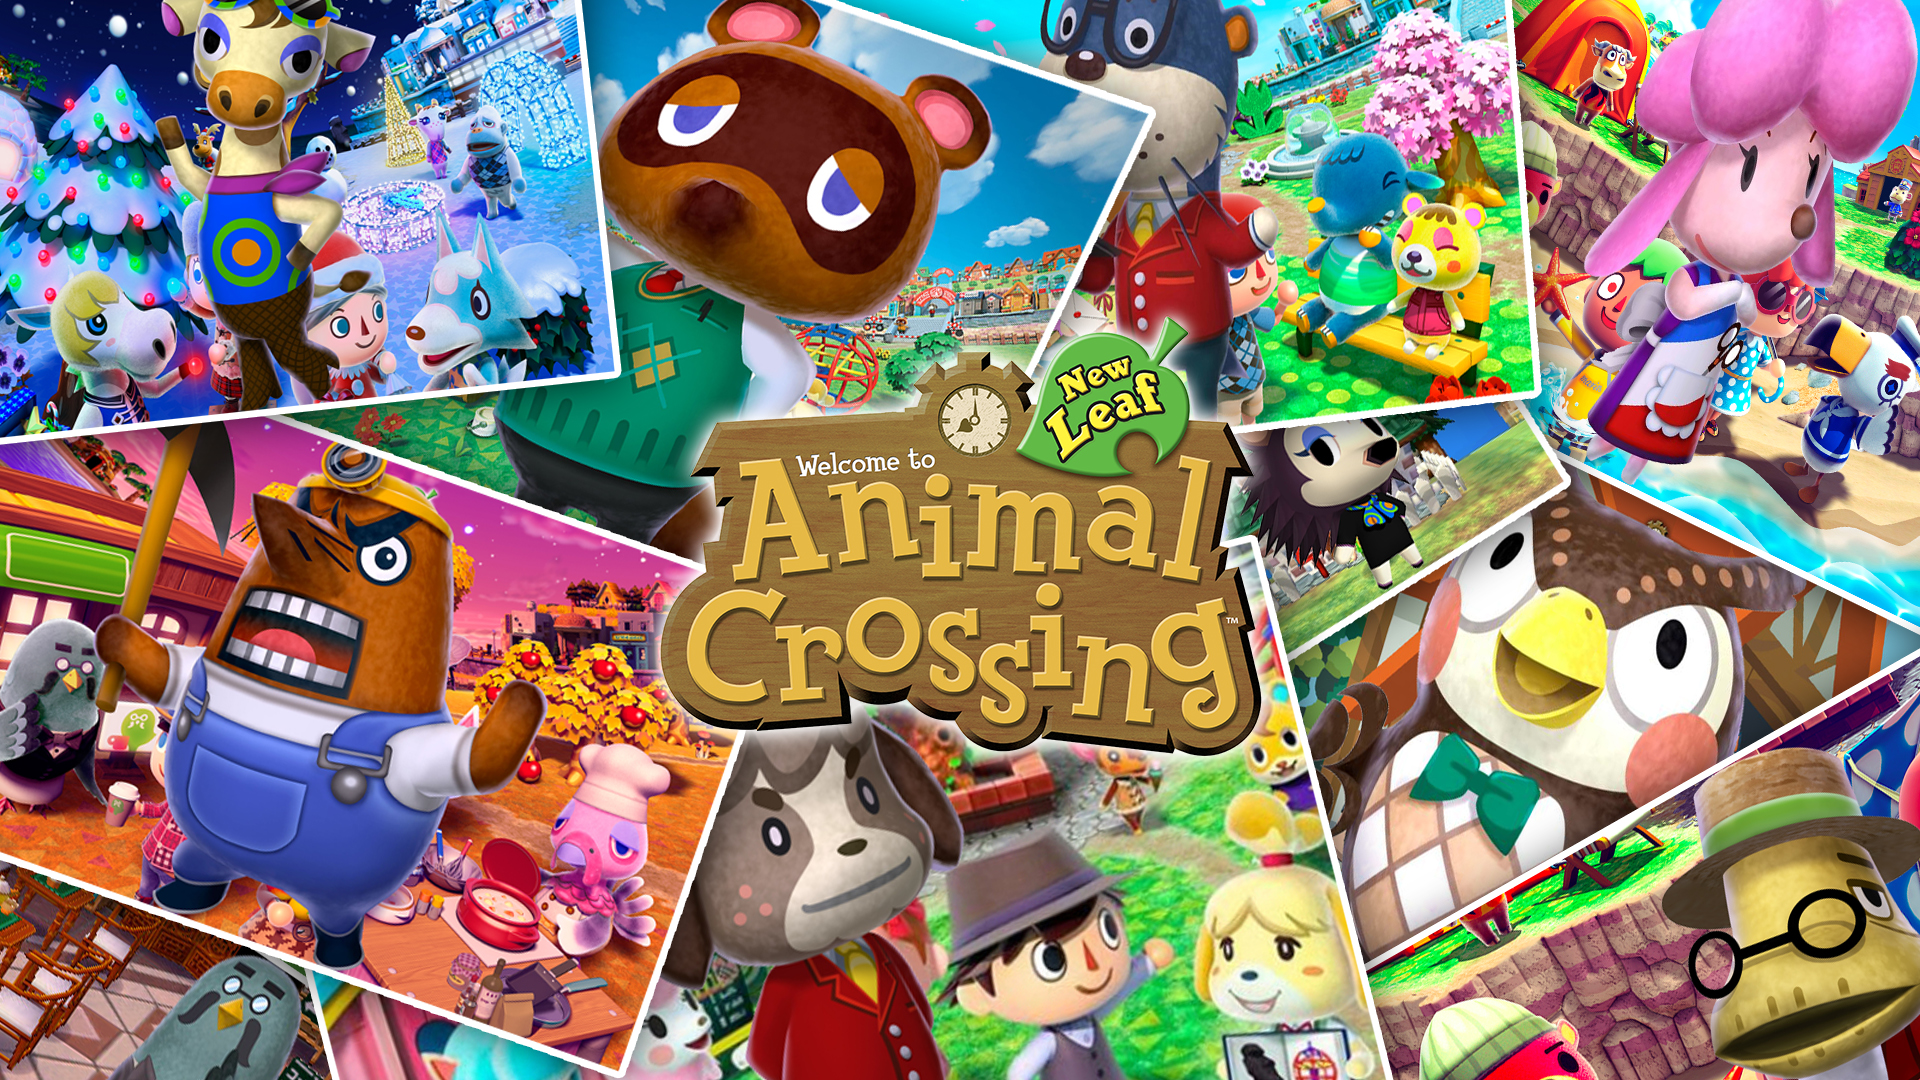 Image Animal Crossing New Pc Android iPhone And iPad Wallpaper